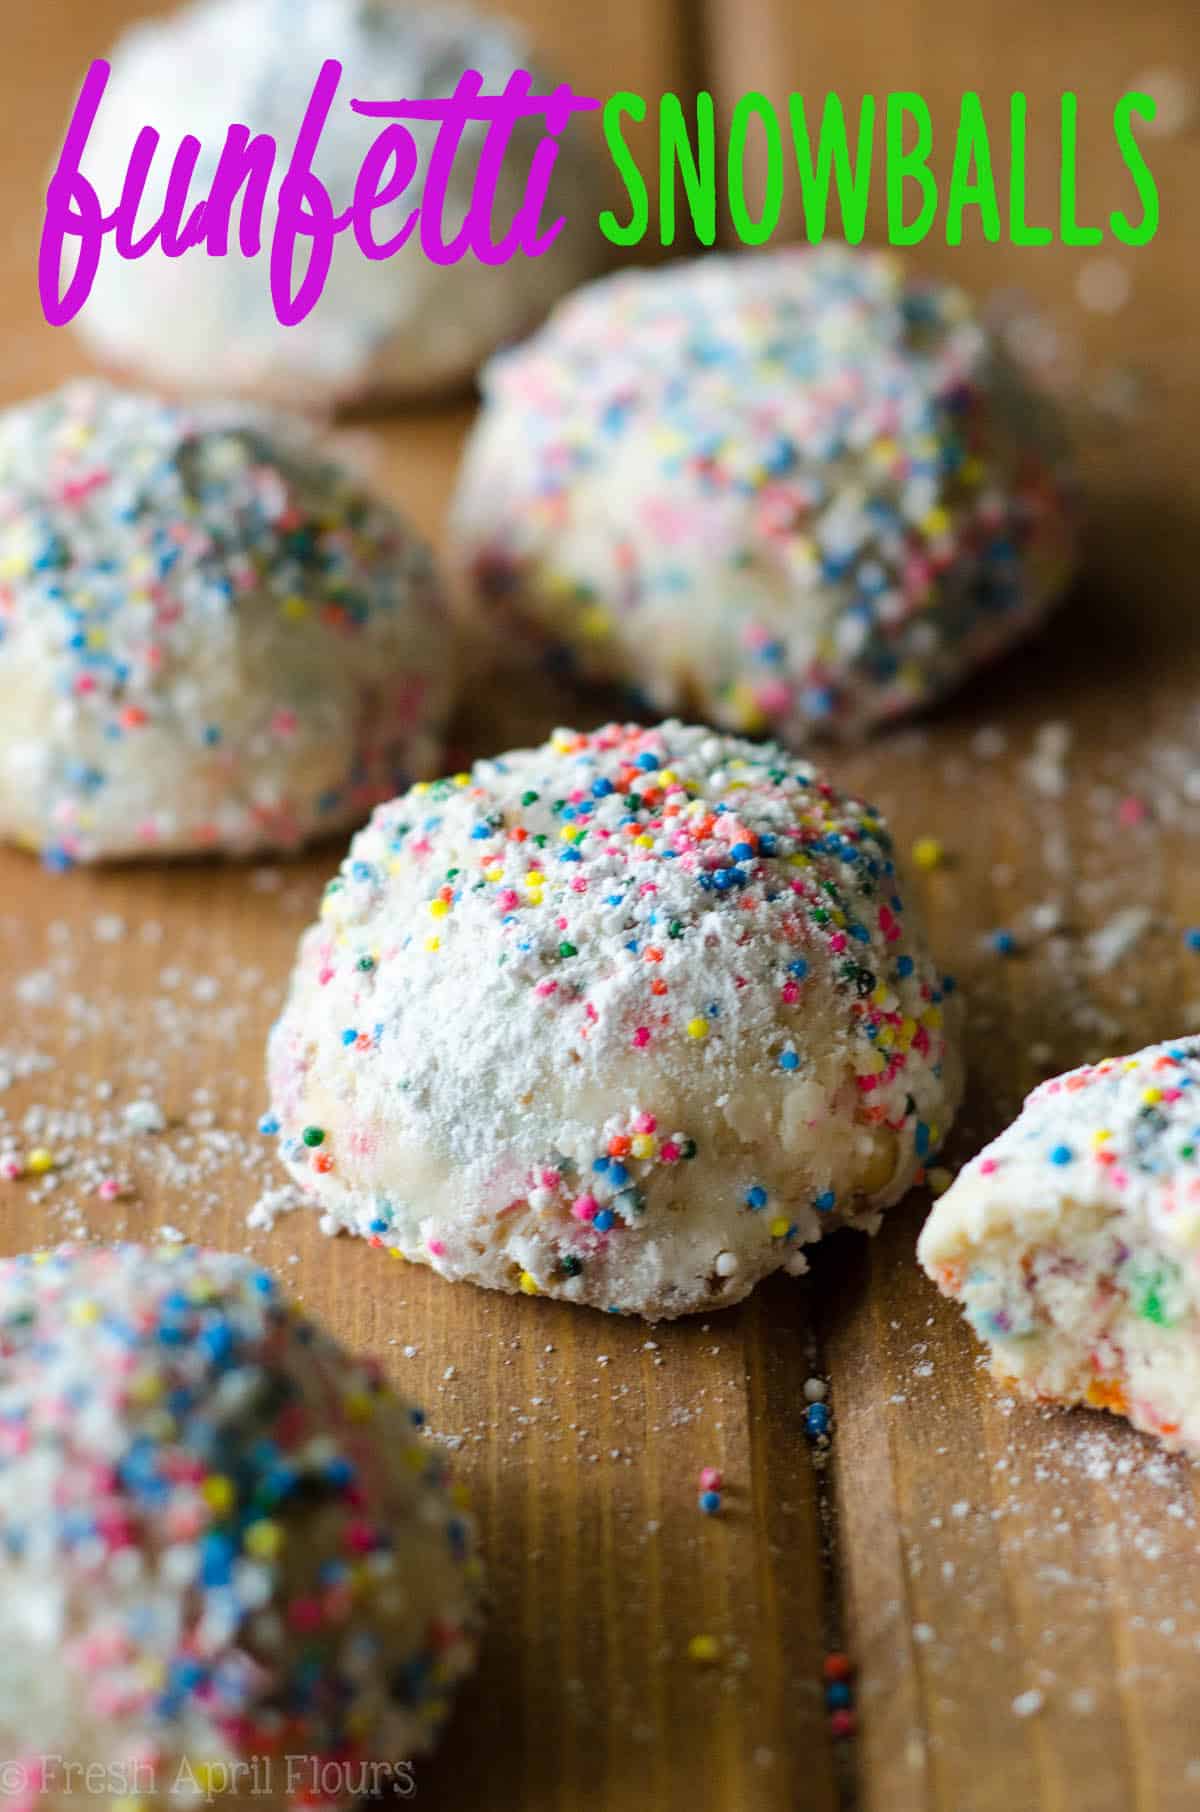 Funfetti Snowballs: Buttery, melt-in-your-mouth shortbread cookies filled with colorful sprinkles and rolled in powdered sugar. via @frshaprilflours